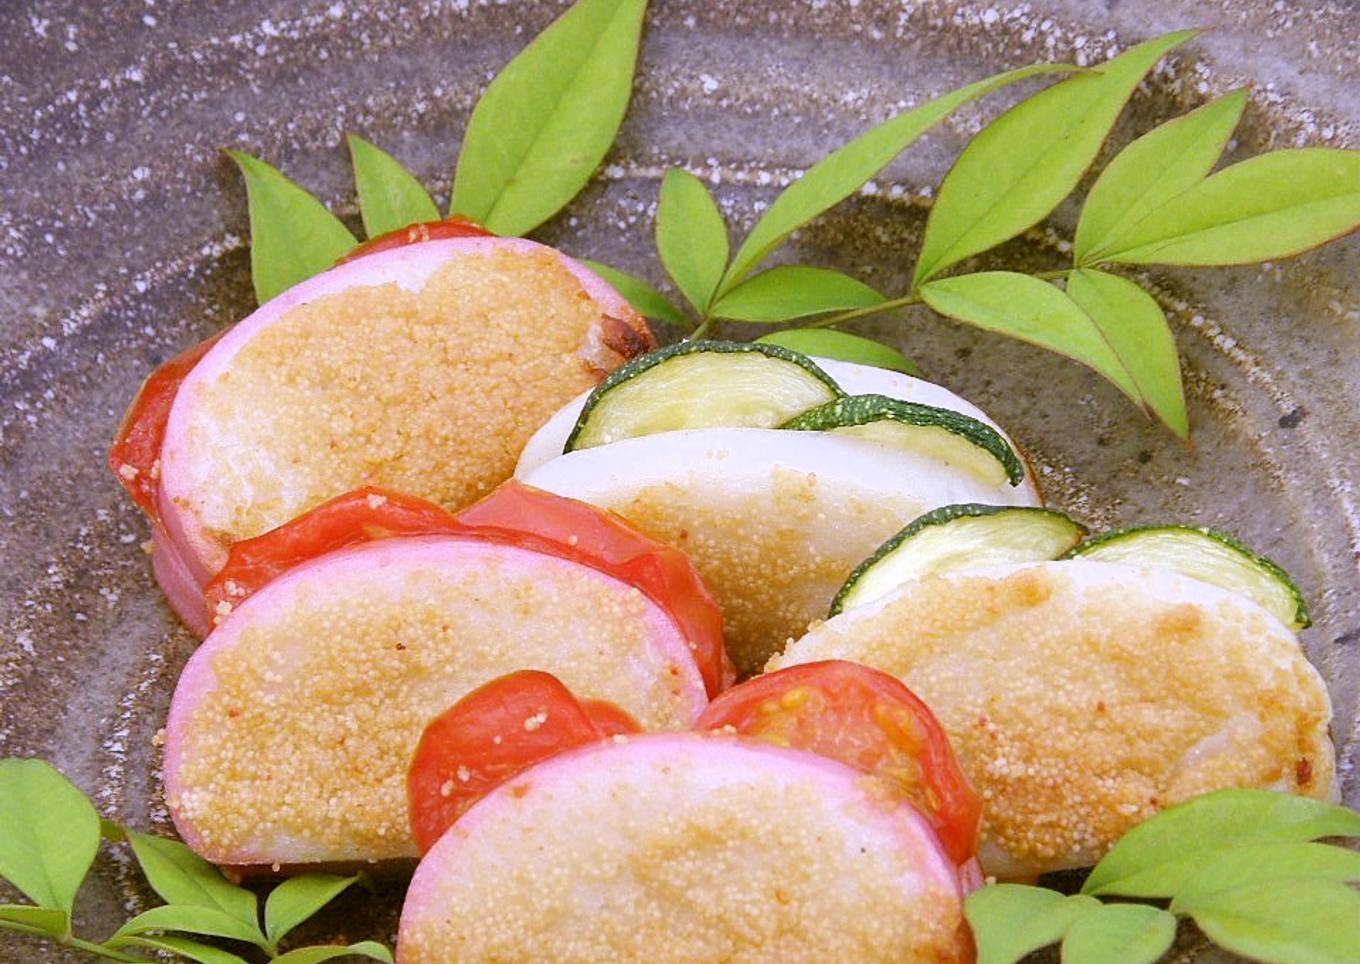 Recipe of Quick Beer Snacks for Father's Day: Toasted Kamaboko Fish
Cakes with Spicy Mentaiko